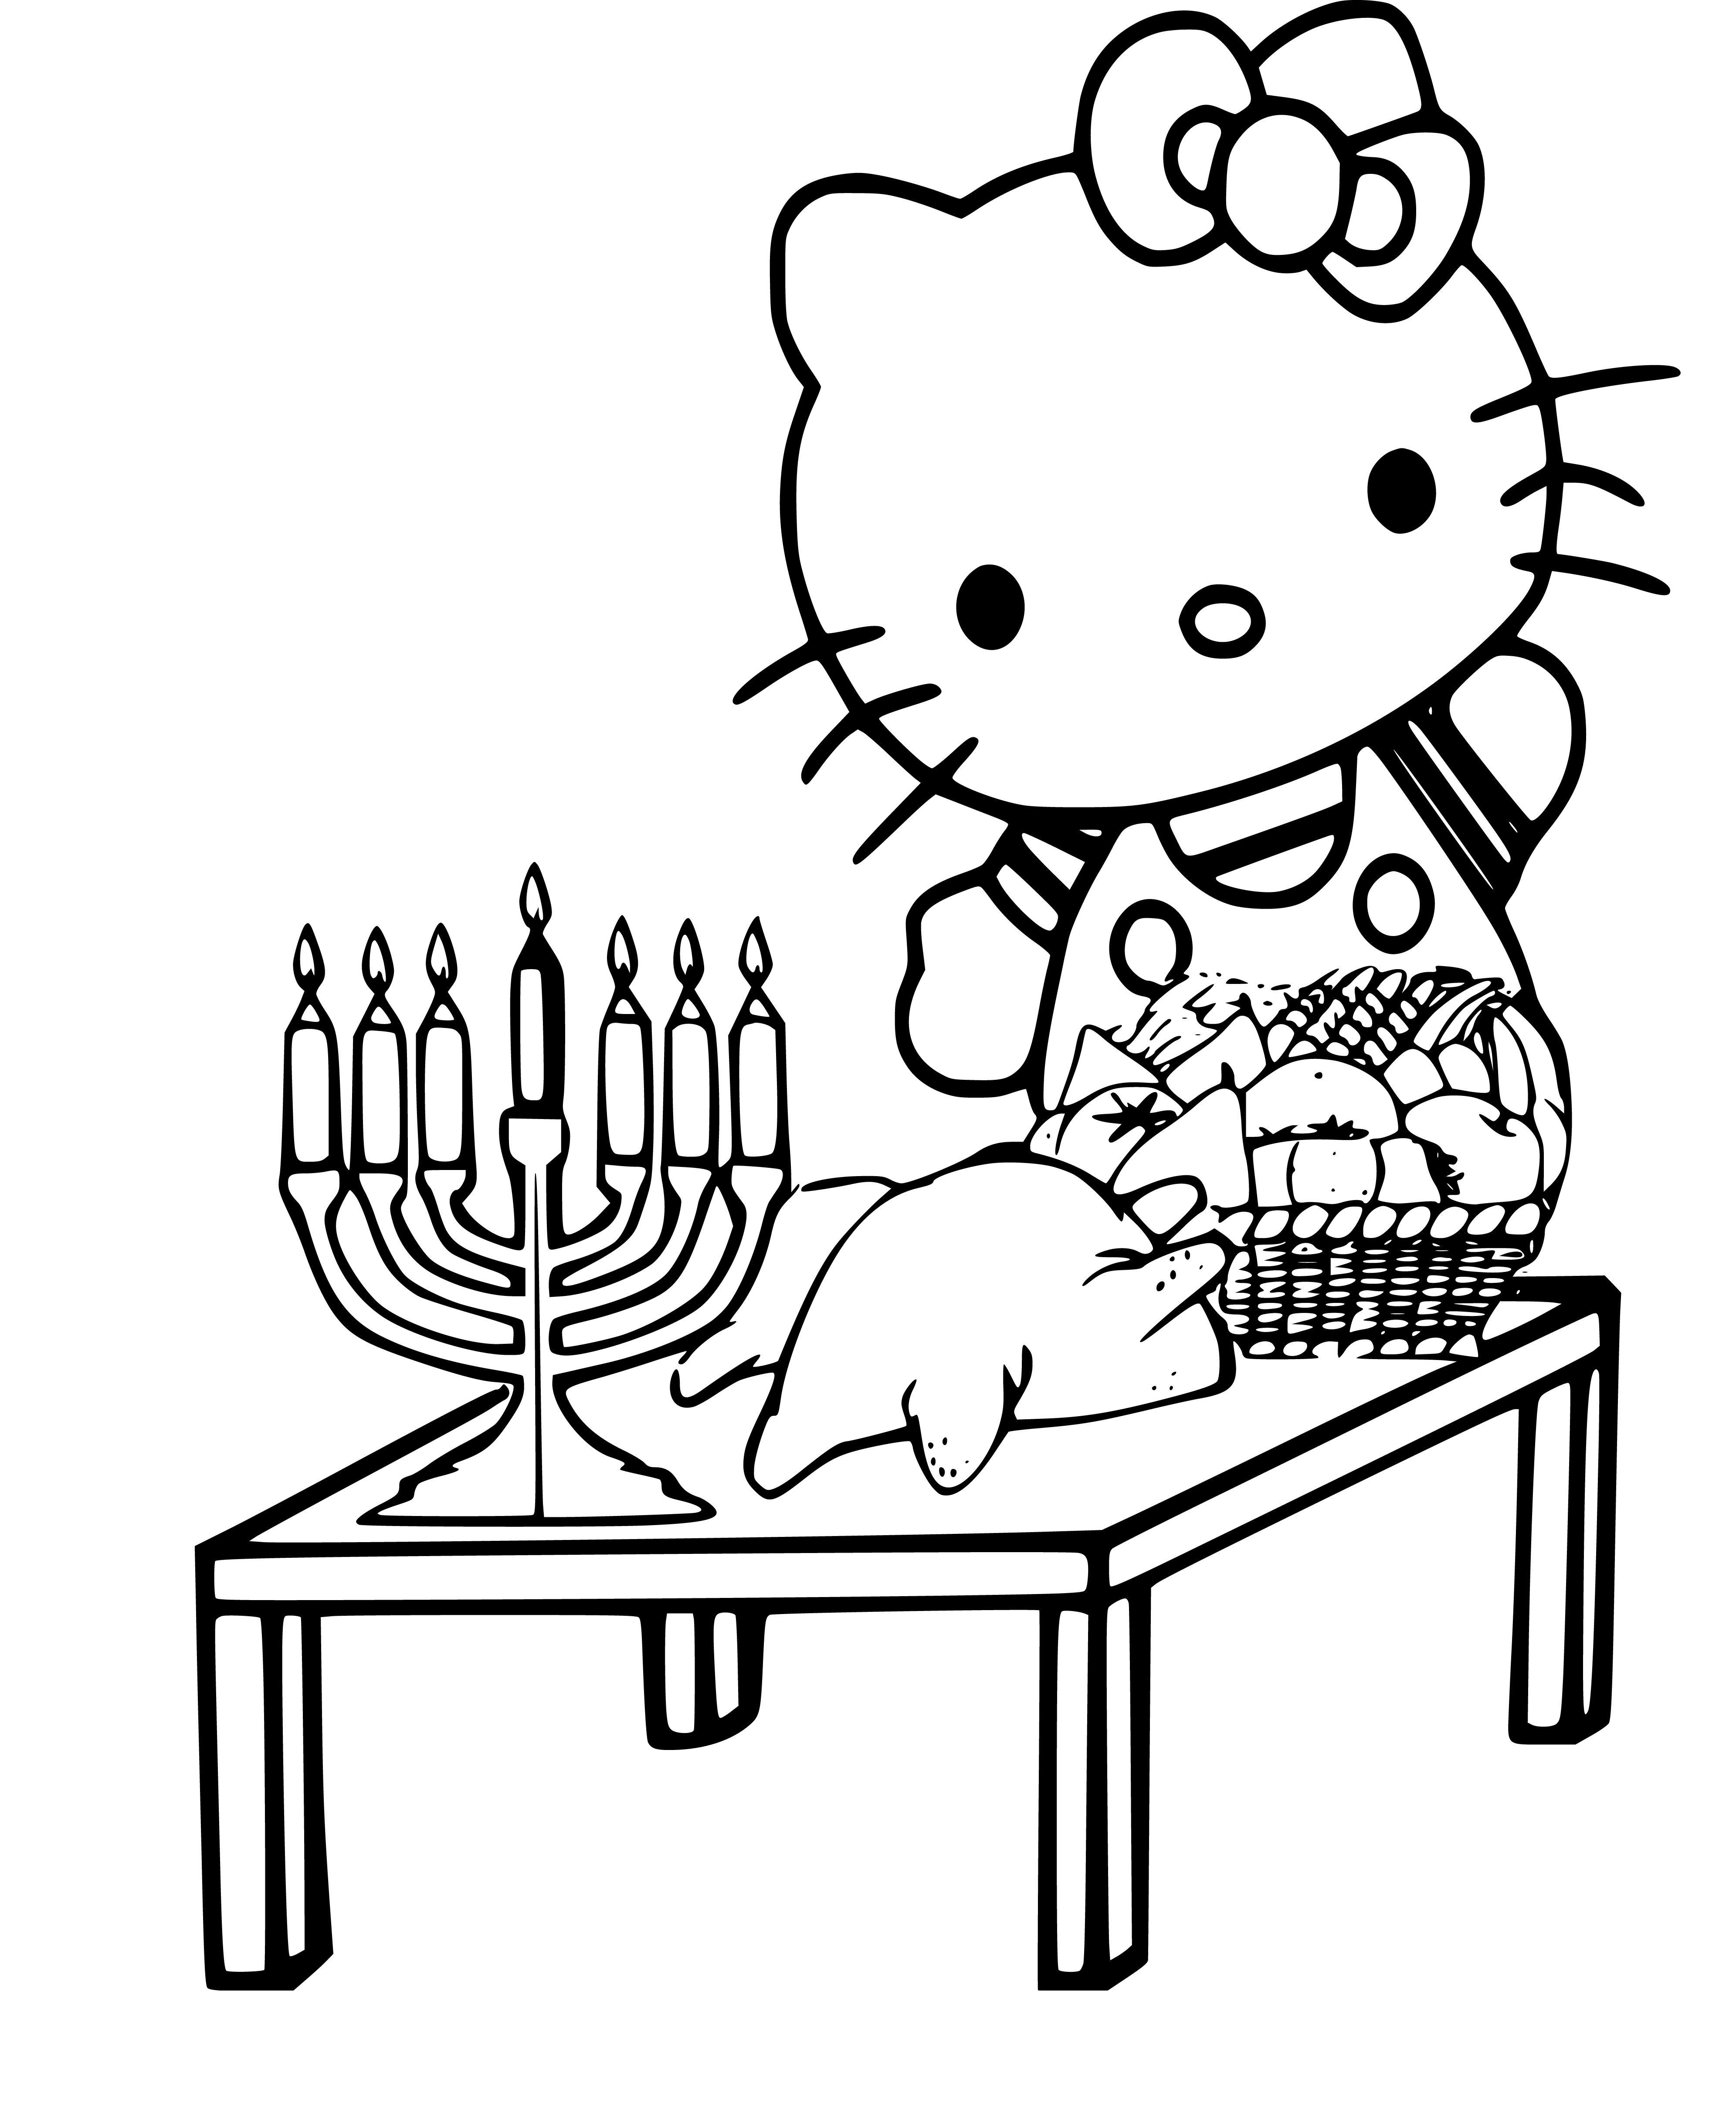 Printable Hello Kitty thanksgiving Coloring Page for kids.